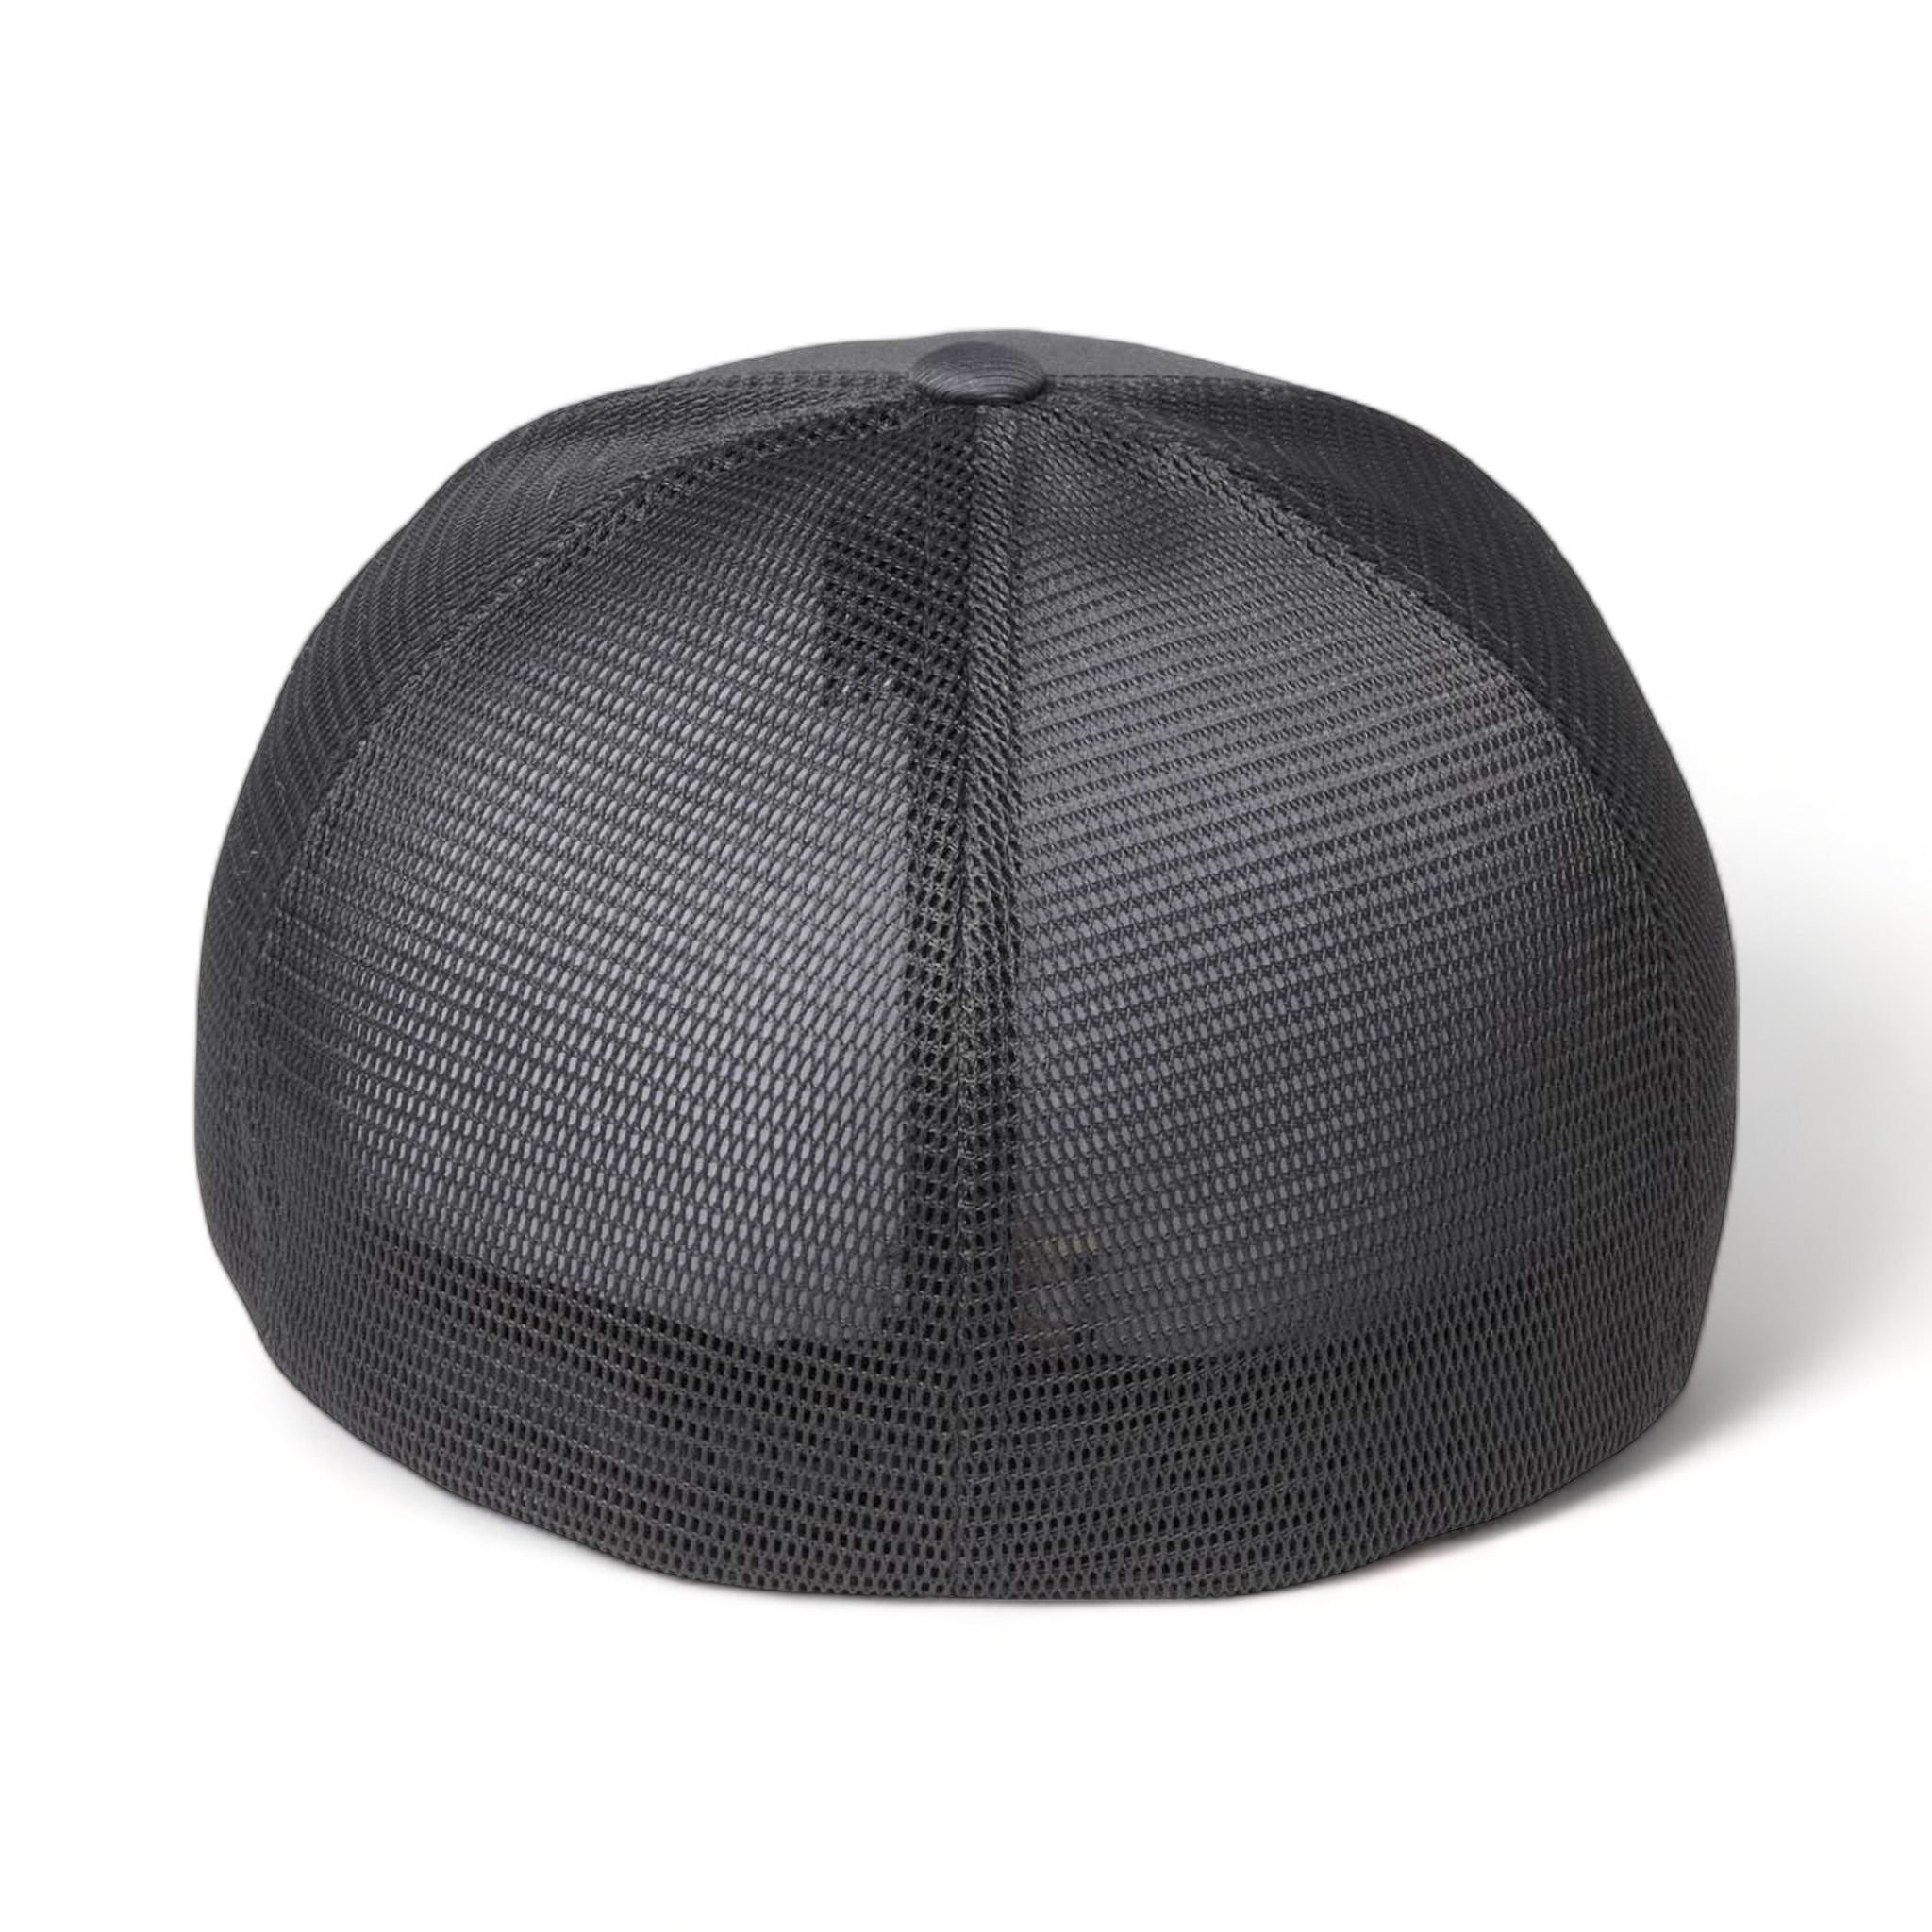 Back view of Flexfit 5511UP custom hat in charcoal